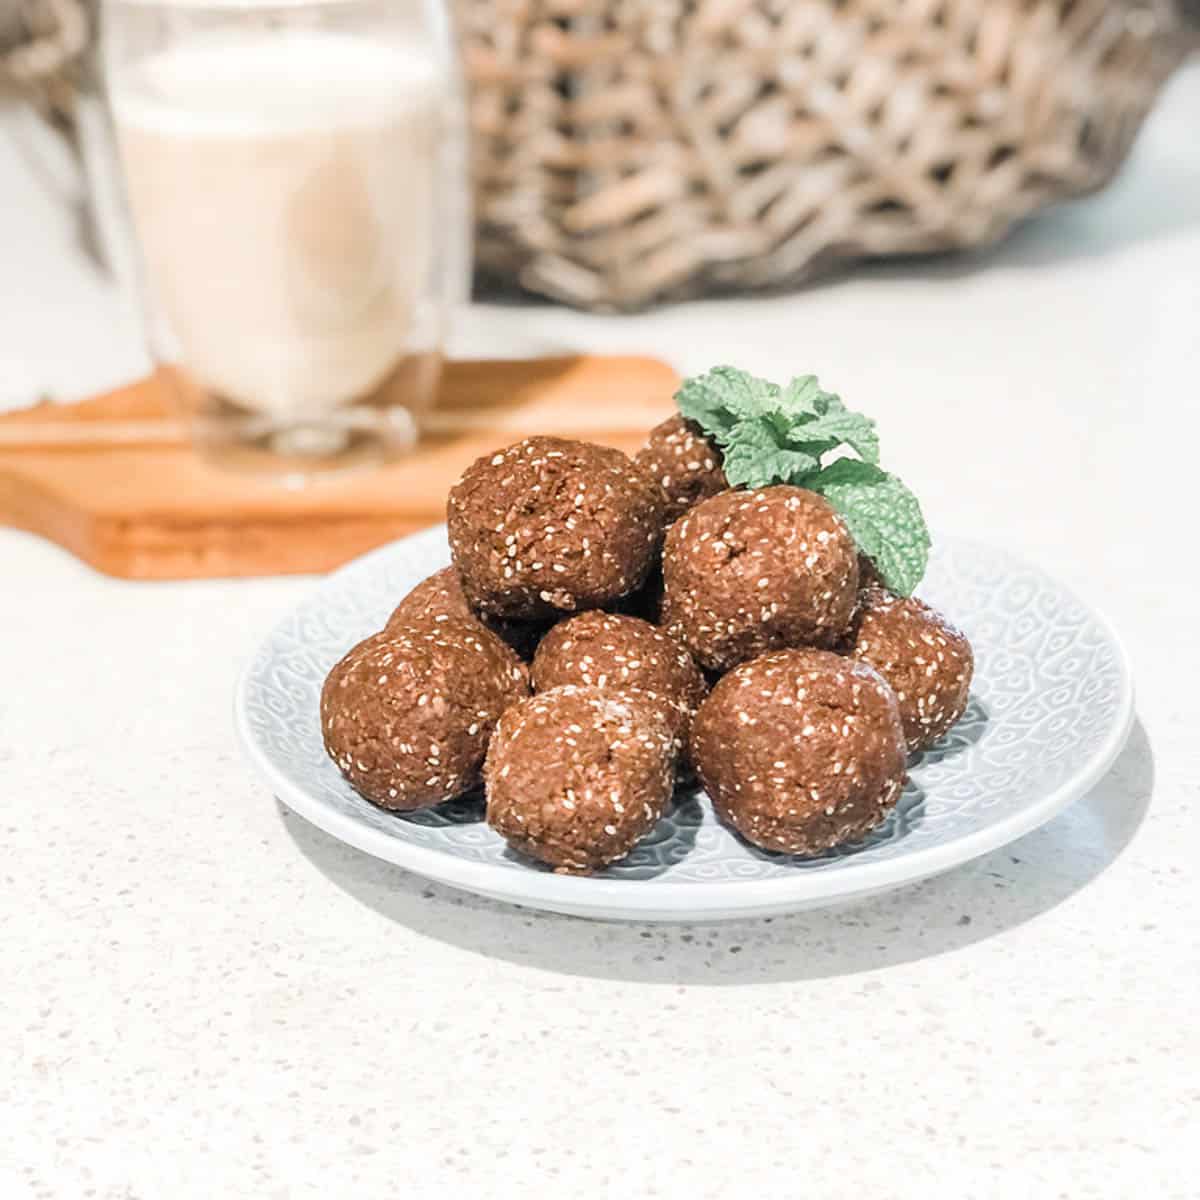 photo of pile of chocolate bliss balls on a blue plate with a cup of coffee in the background